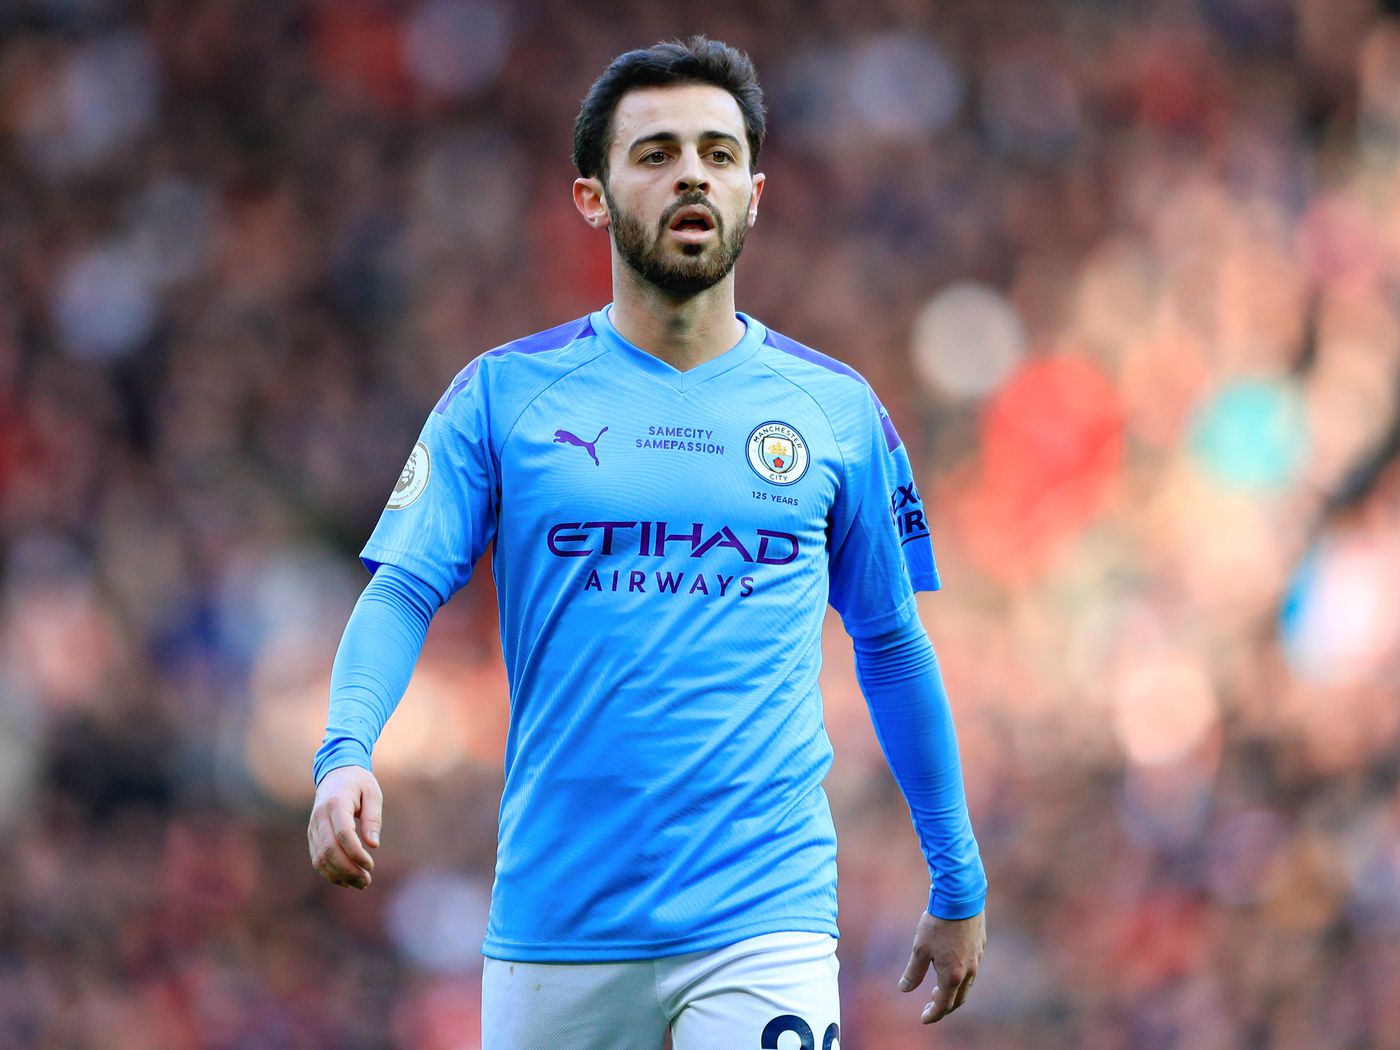 Bernardo Silva: “The one goal that means the most to me is..” and Blue